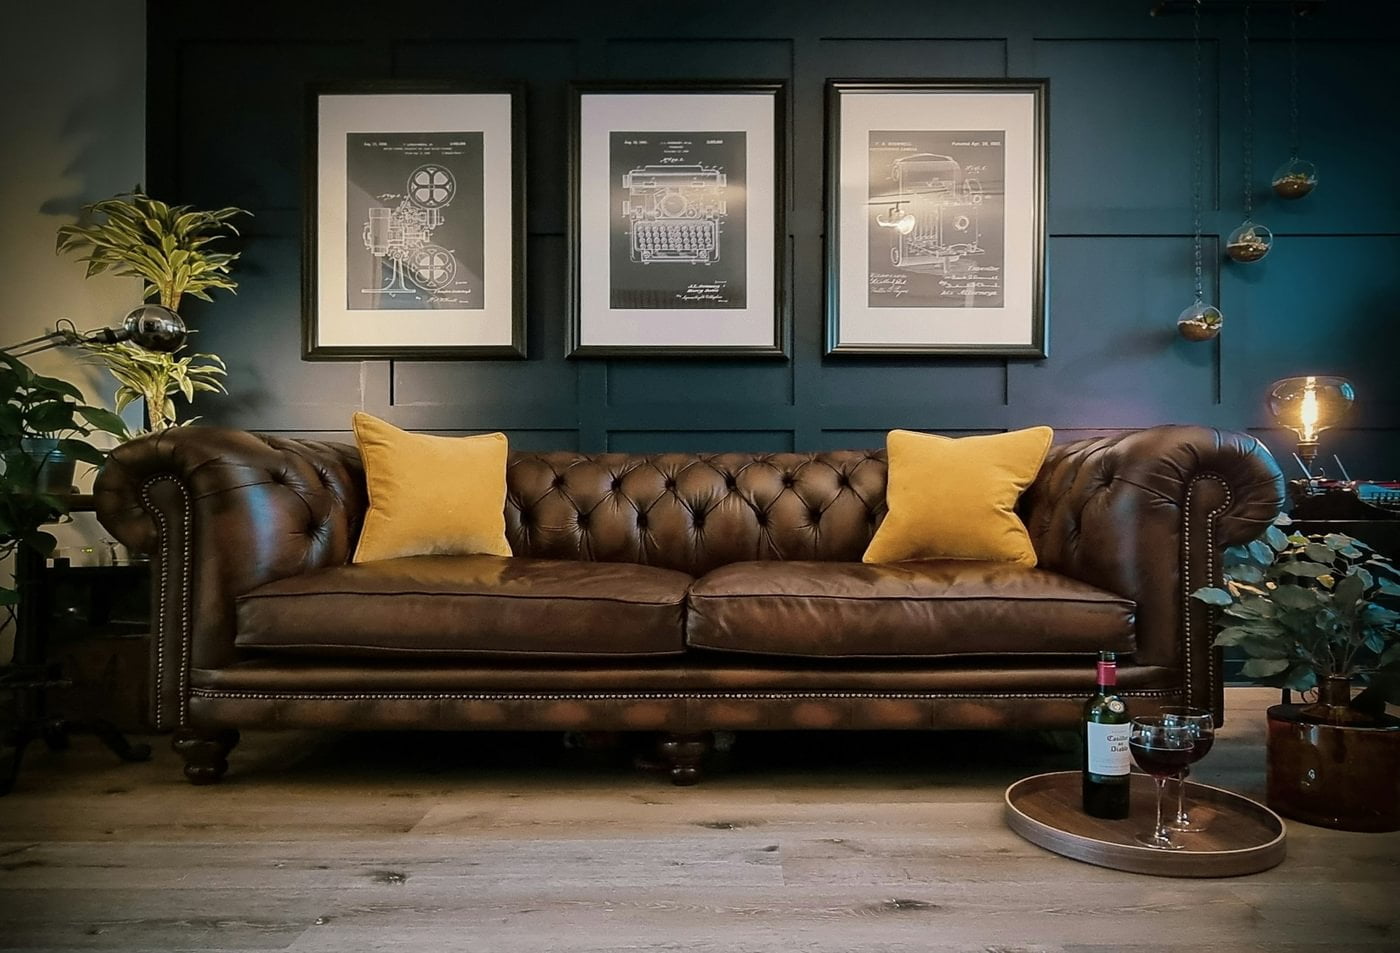 A brown chesterfield sofa with yellow cushions